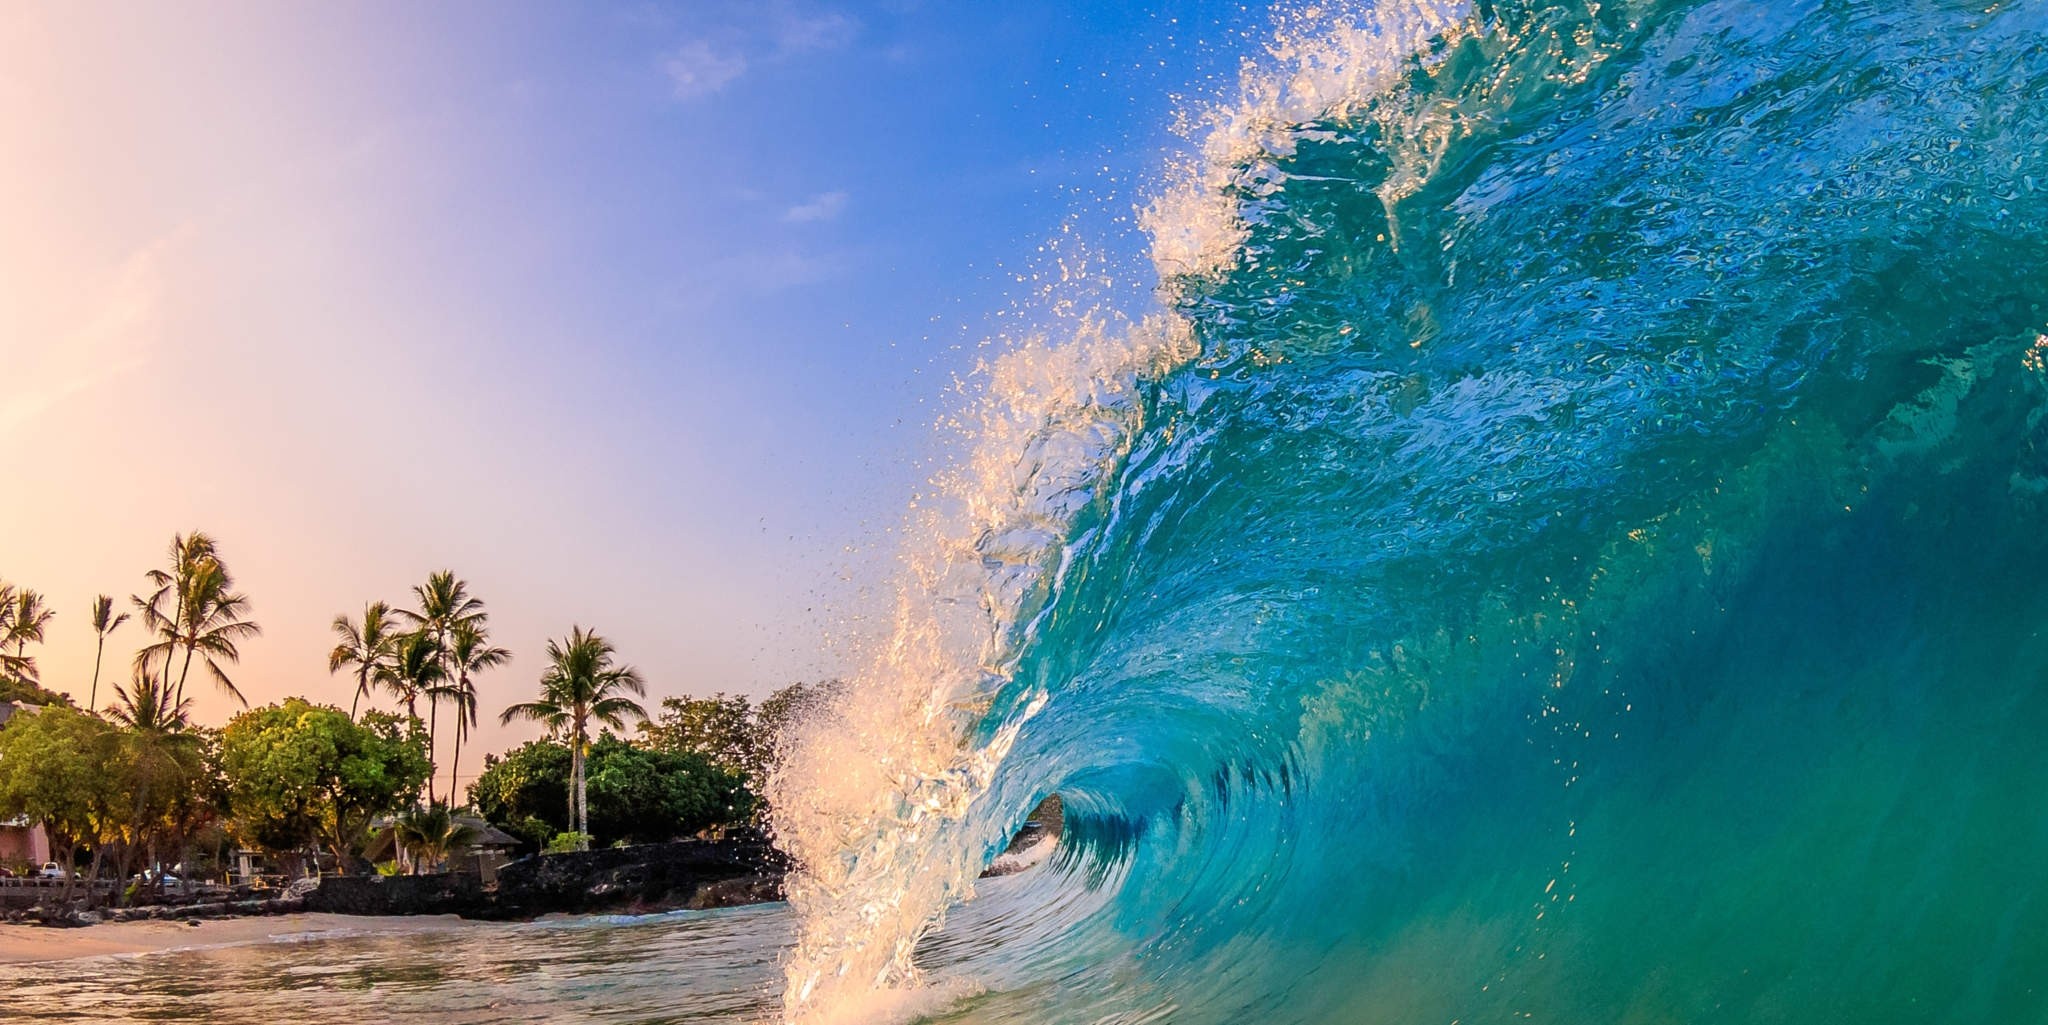 General 2048x1025 photography nature landscape waves sea beach palm trees turquoise water morning sunlight